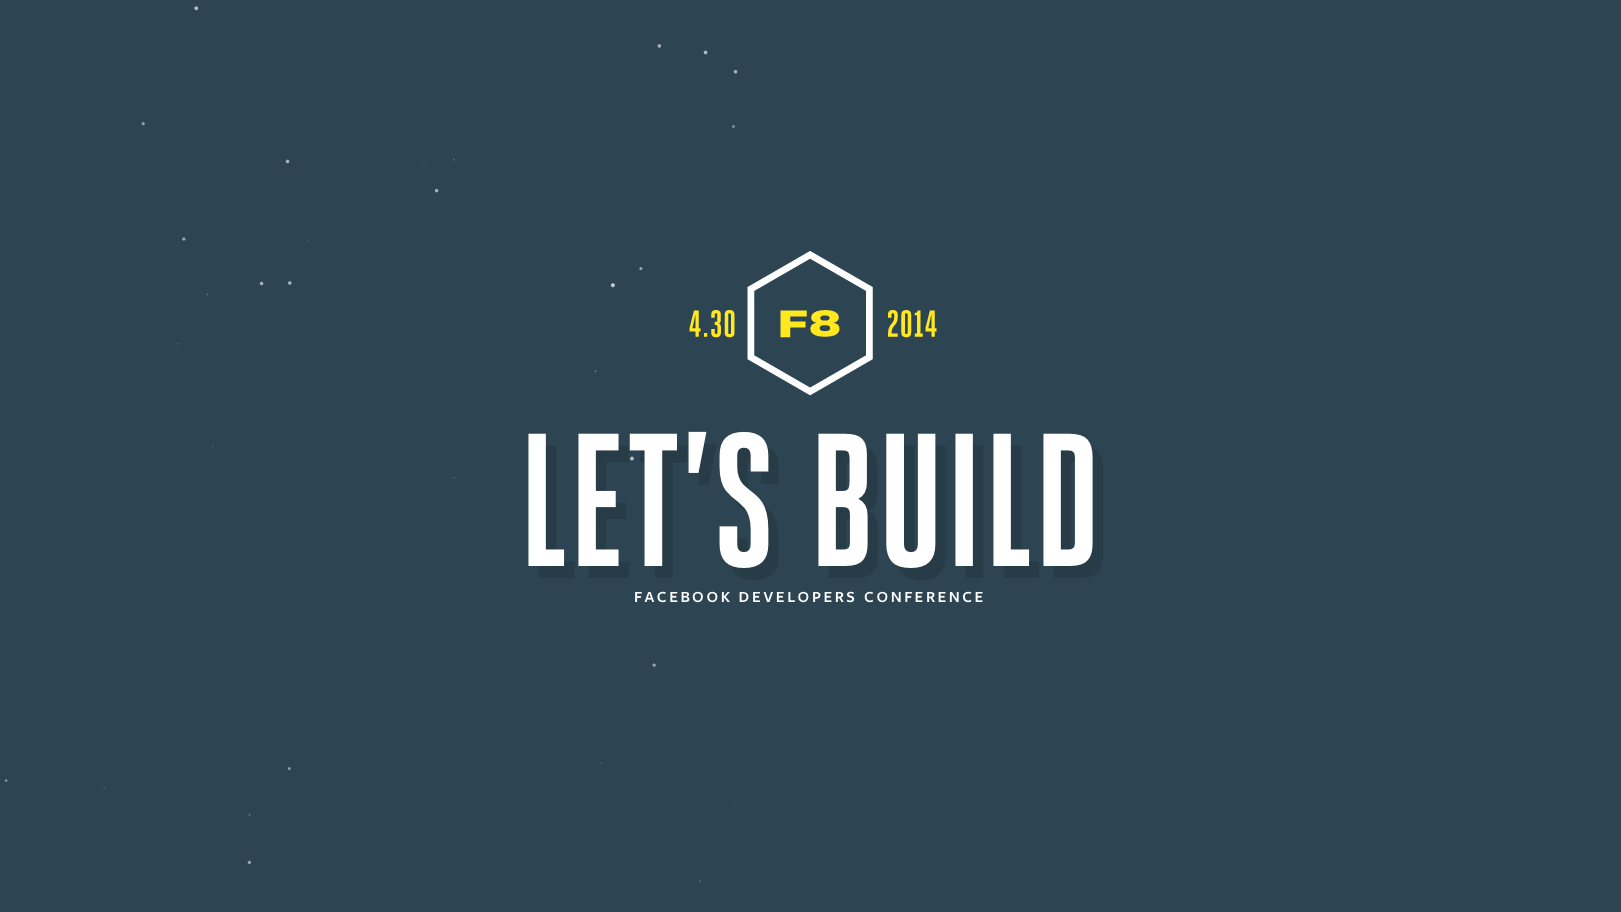 Liveblog from the F8 event